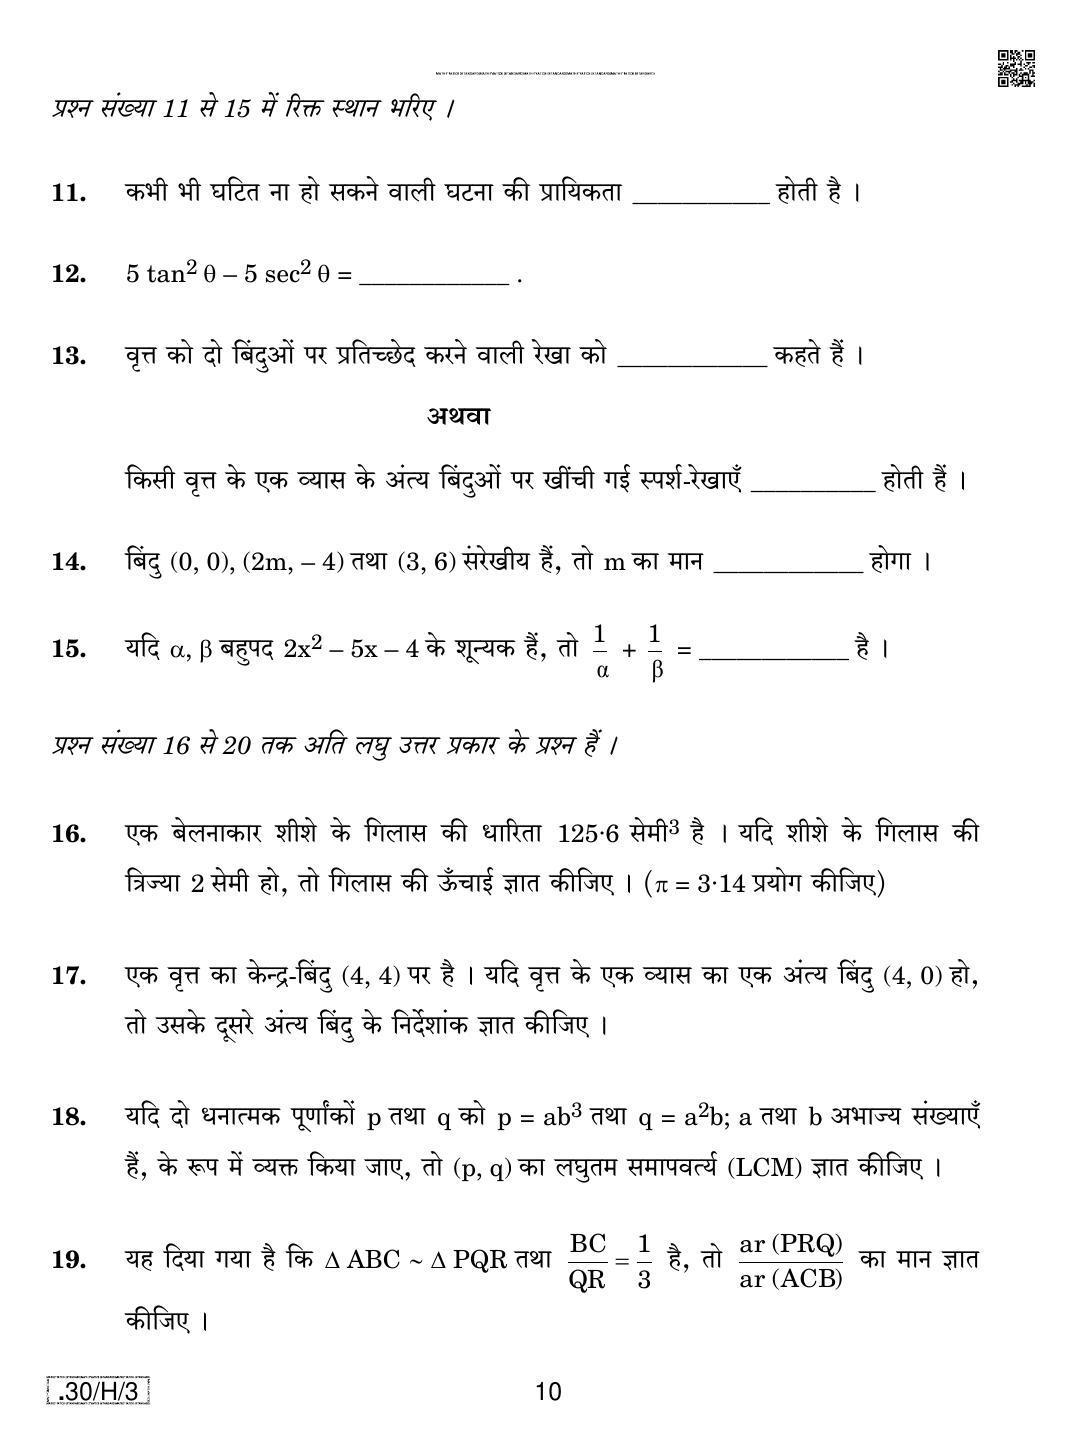 CBSE Class 10 30-C-3 - Maths (Standard) 2020 Compartment Question Paper - Page 10